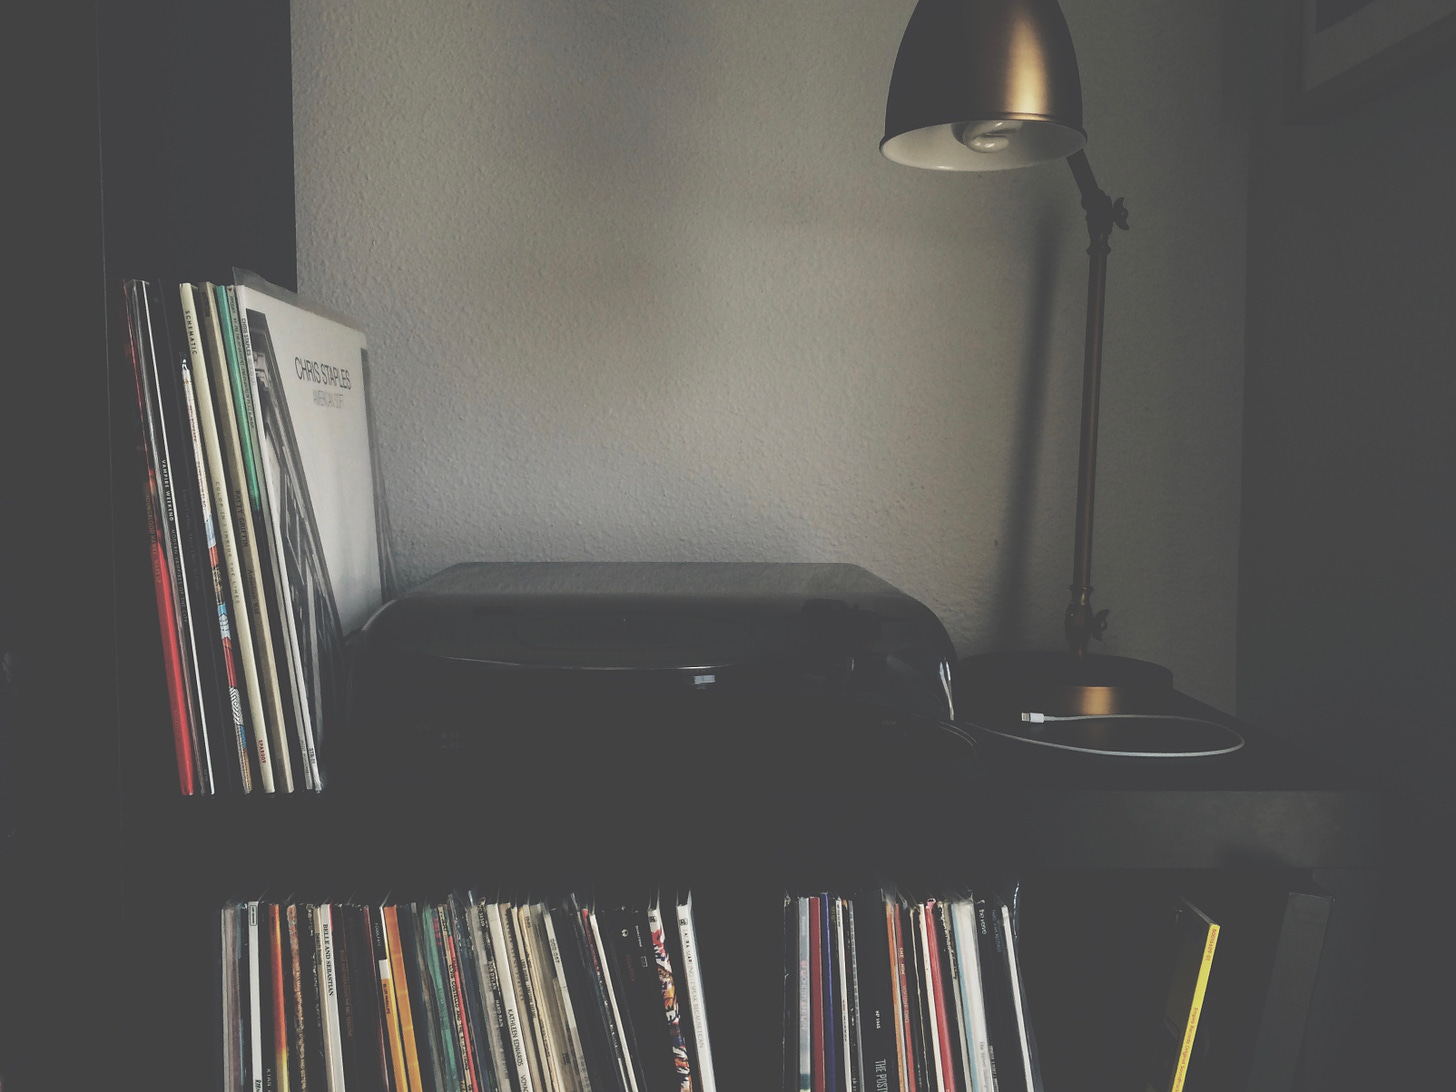 a record player with vertical stacks of records next to and on shelves underneath. An arm-style lap next to it.